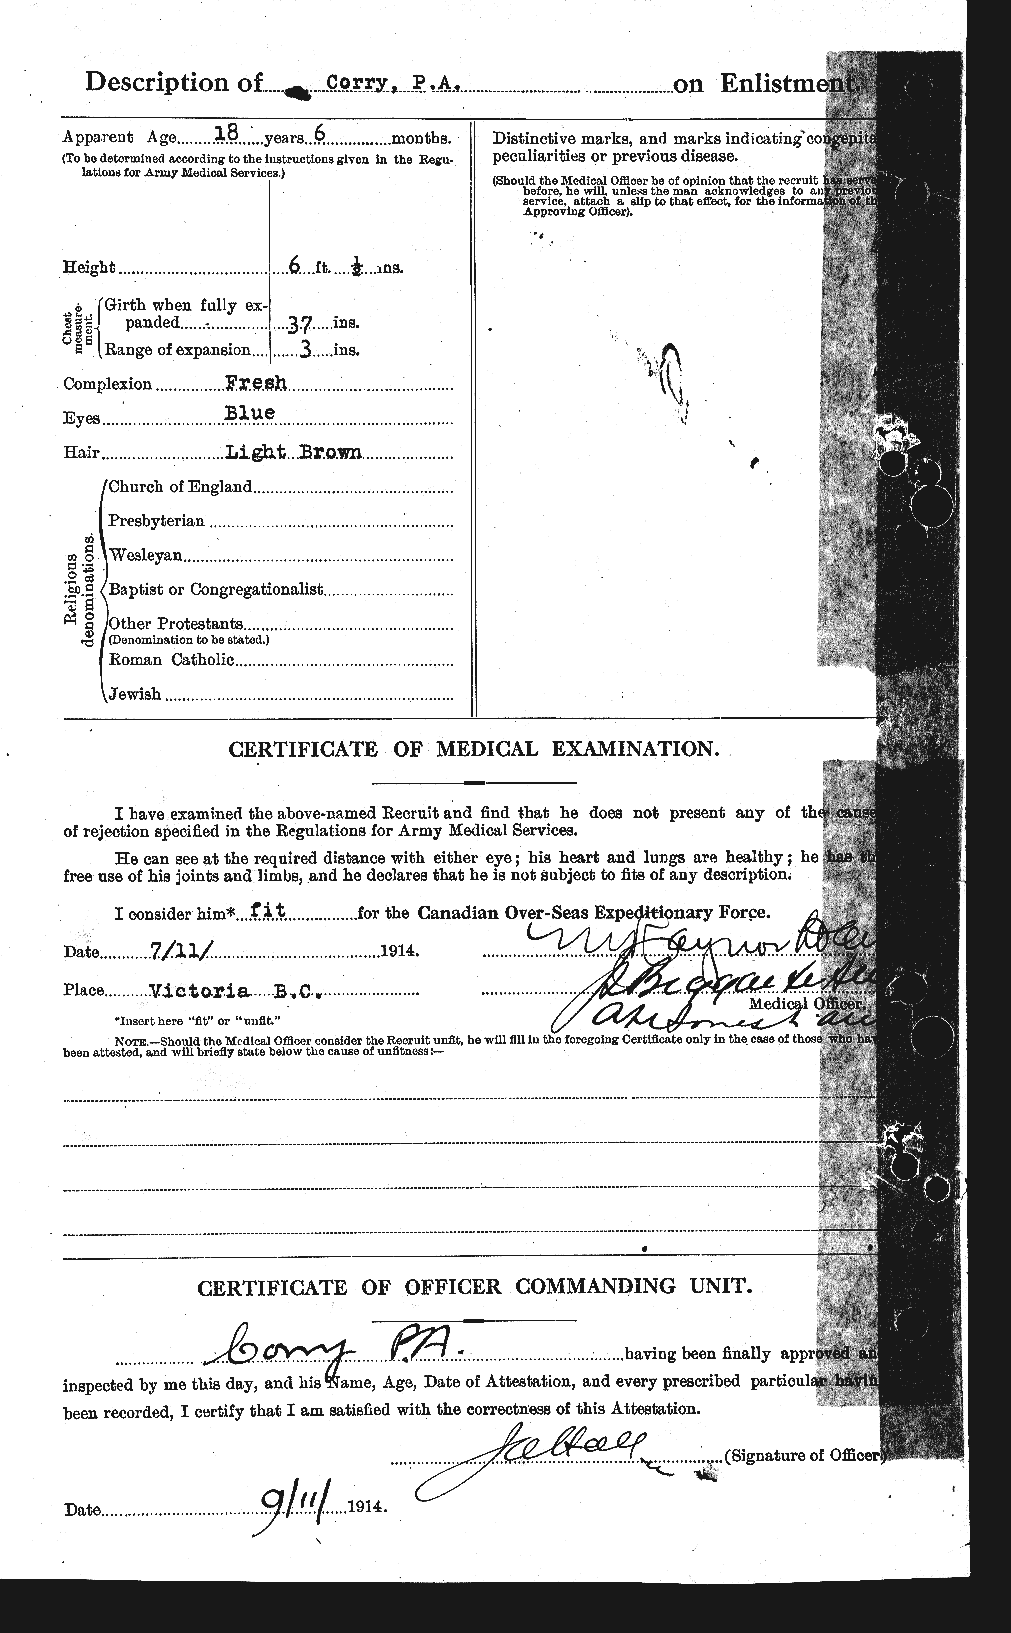 Personnel Records of the First World War - CEF 054214b